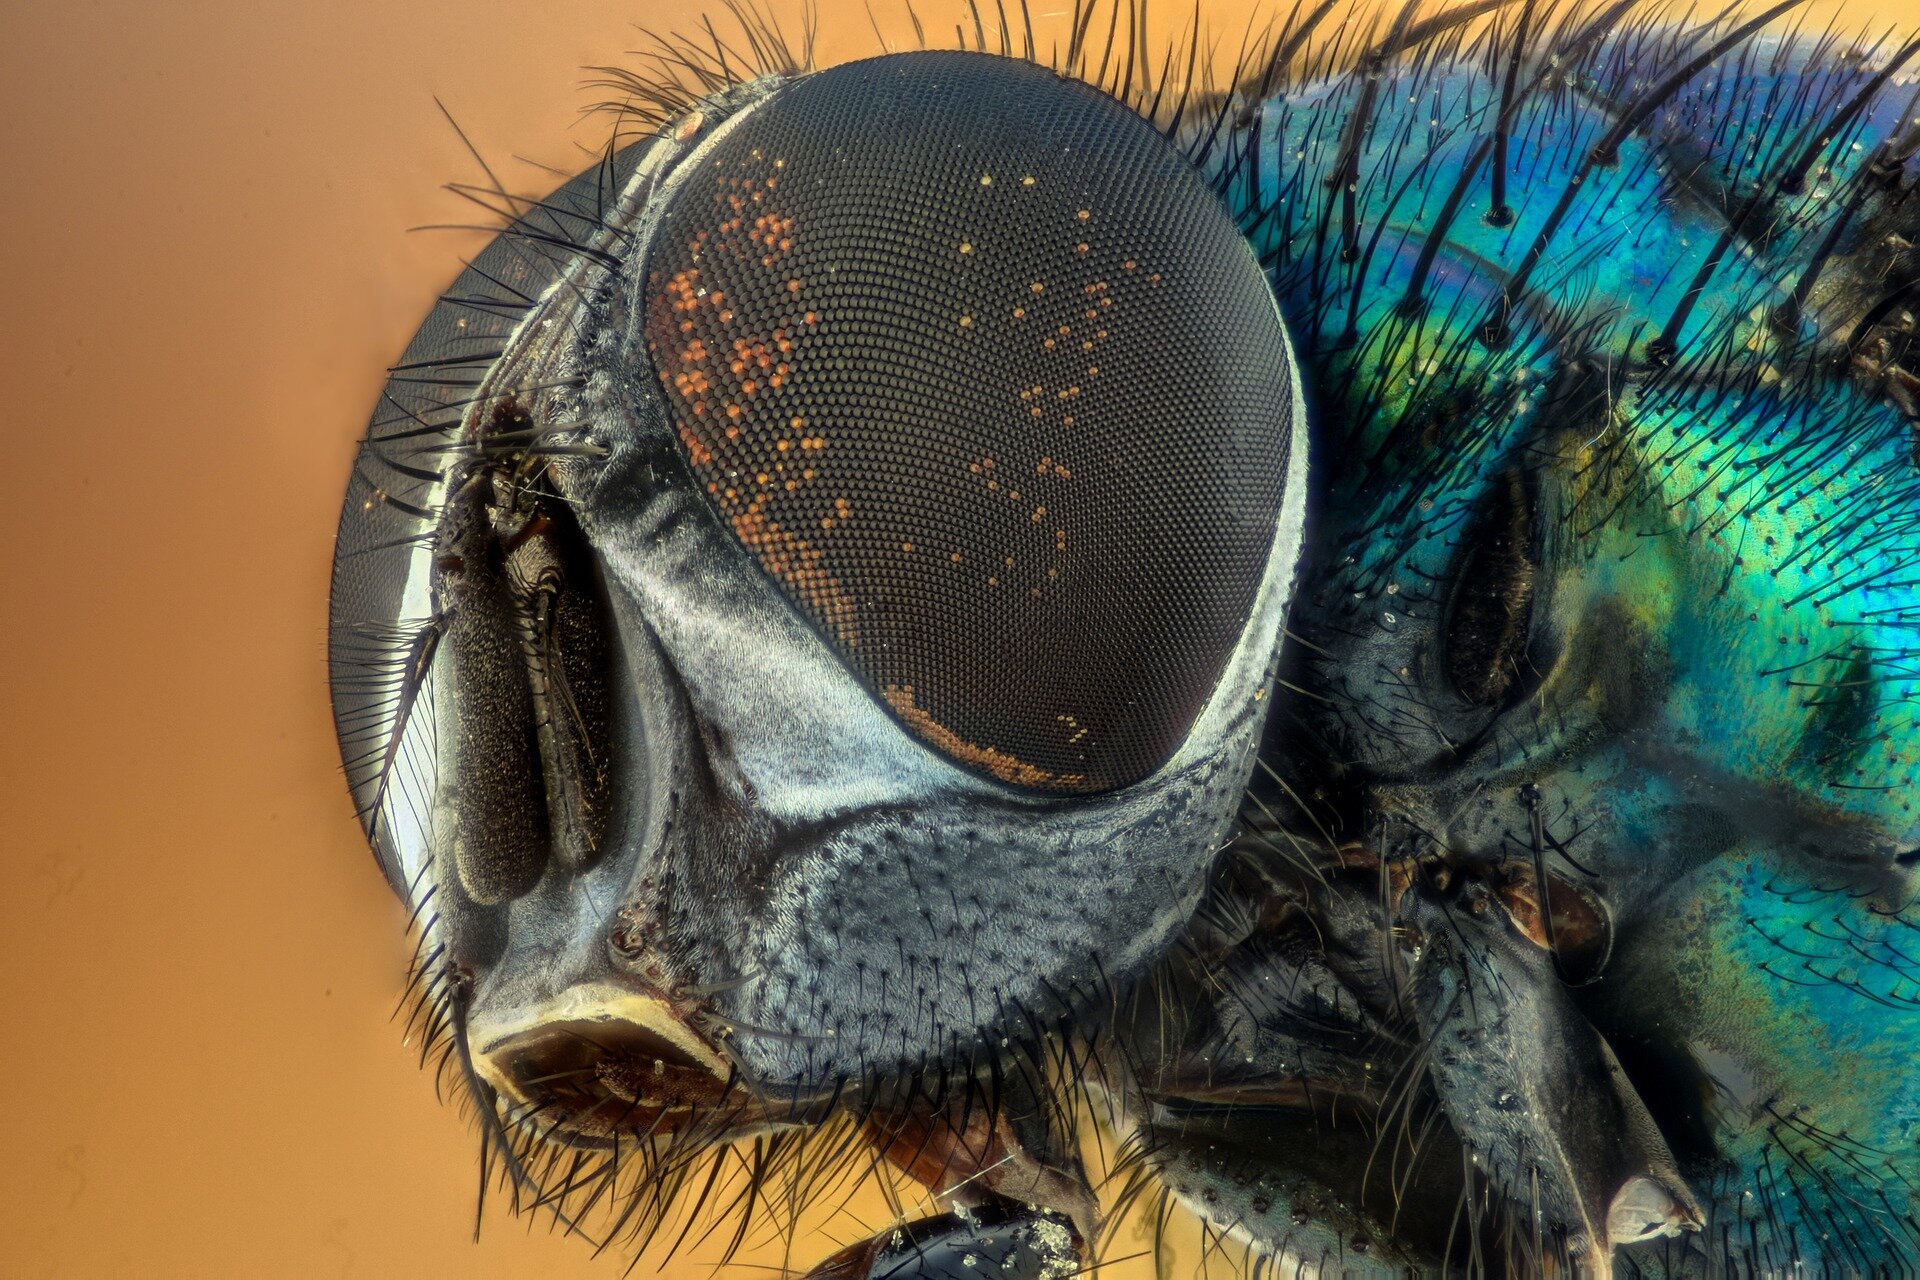 Size of fly's eyes and nose reflect its behavior during mating and